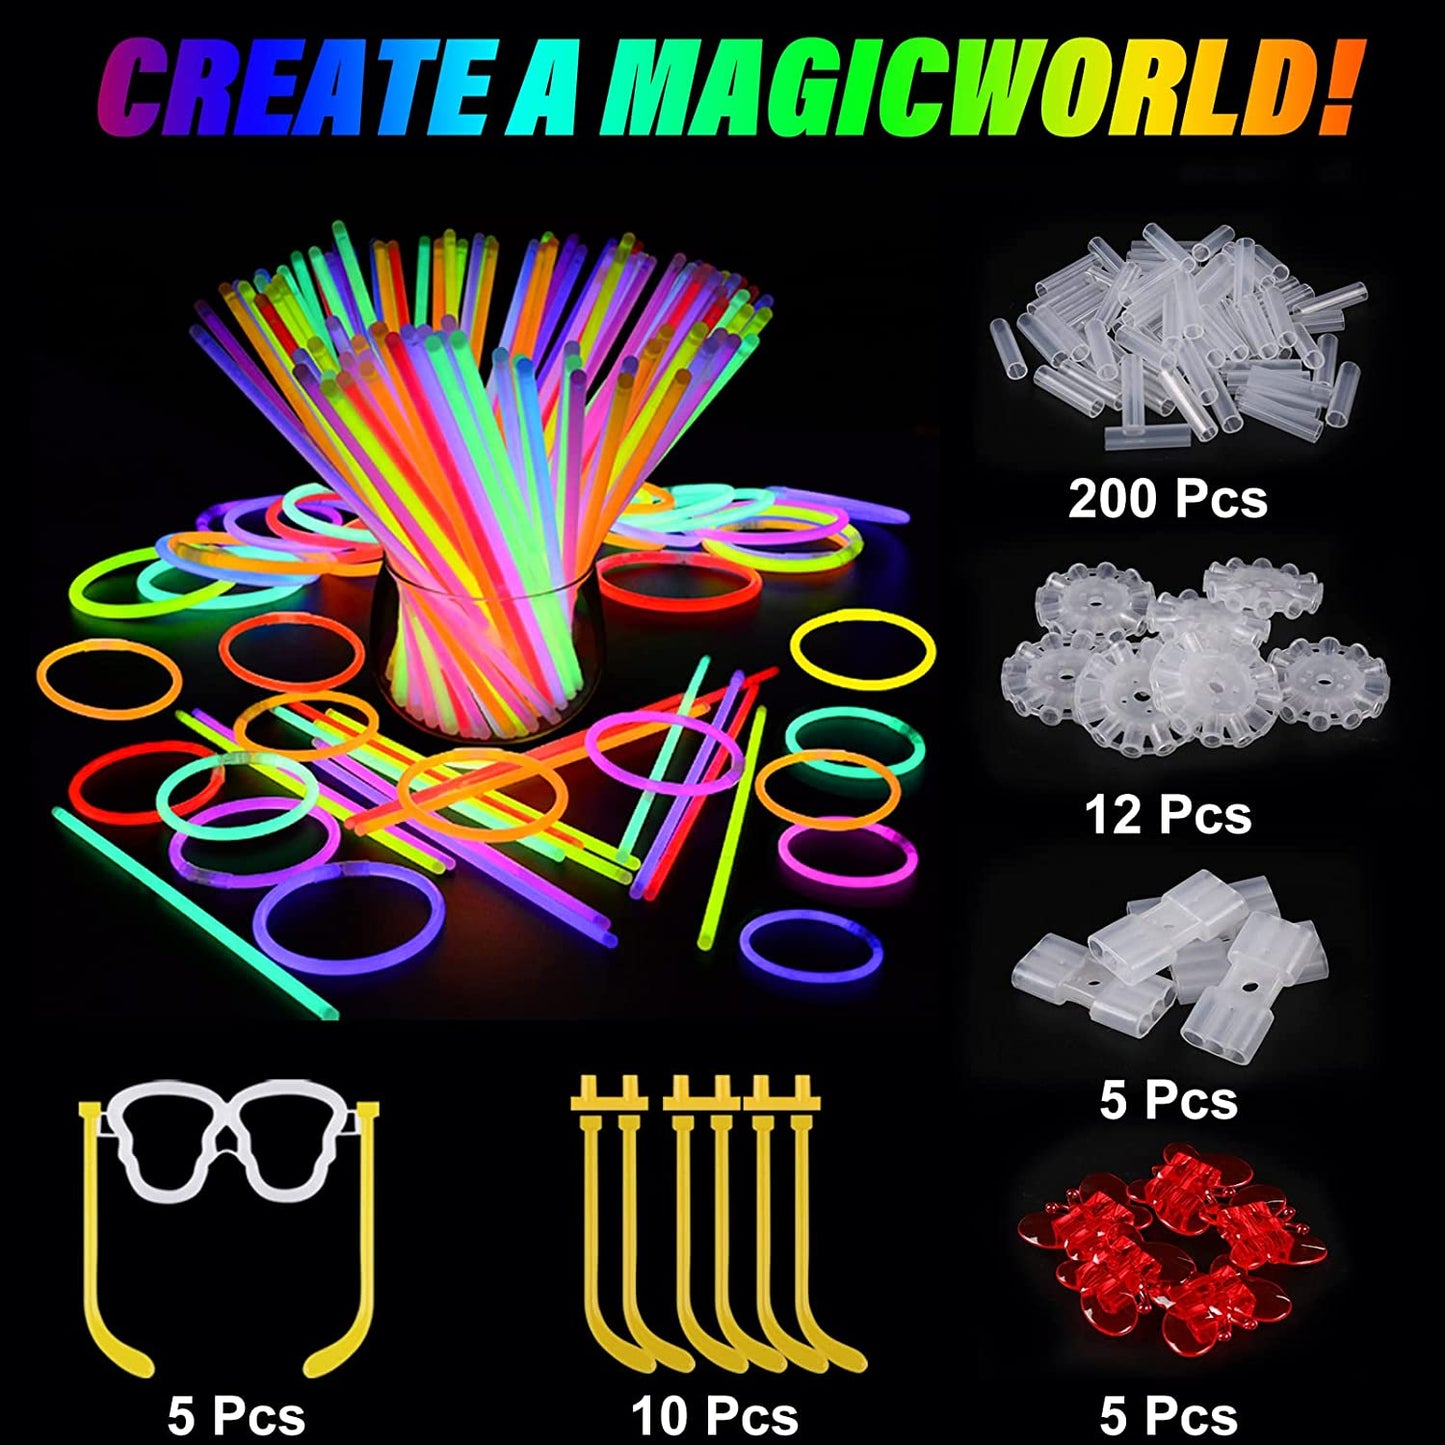 Large Assortment of 200 Glow Sticks with 467 Pieces: Party Favors for Kids and Adults, Including Glowsticks in 7 Vibrant Colors, Connectors for Glow Necklaces, Flower Balls, Luminous Glasses, and Triple/Butterfly Bracelets